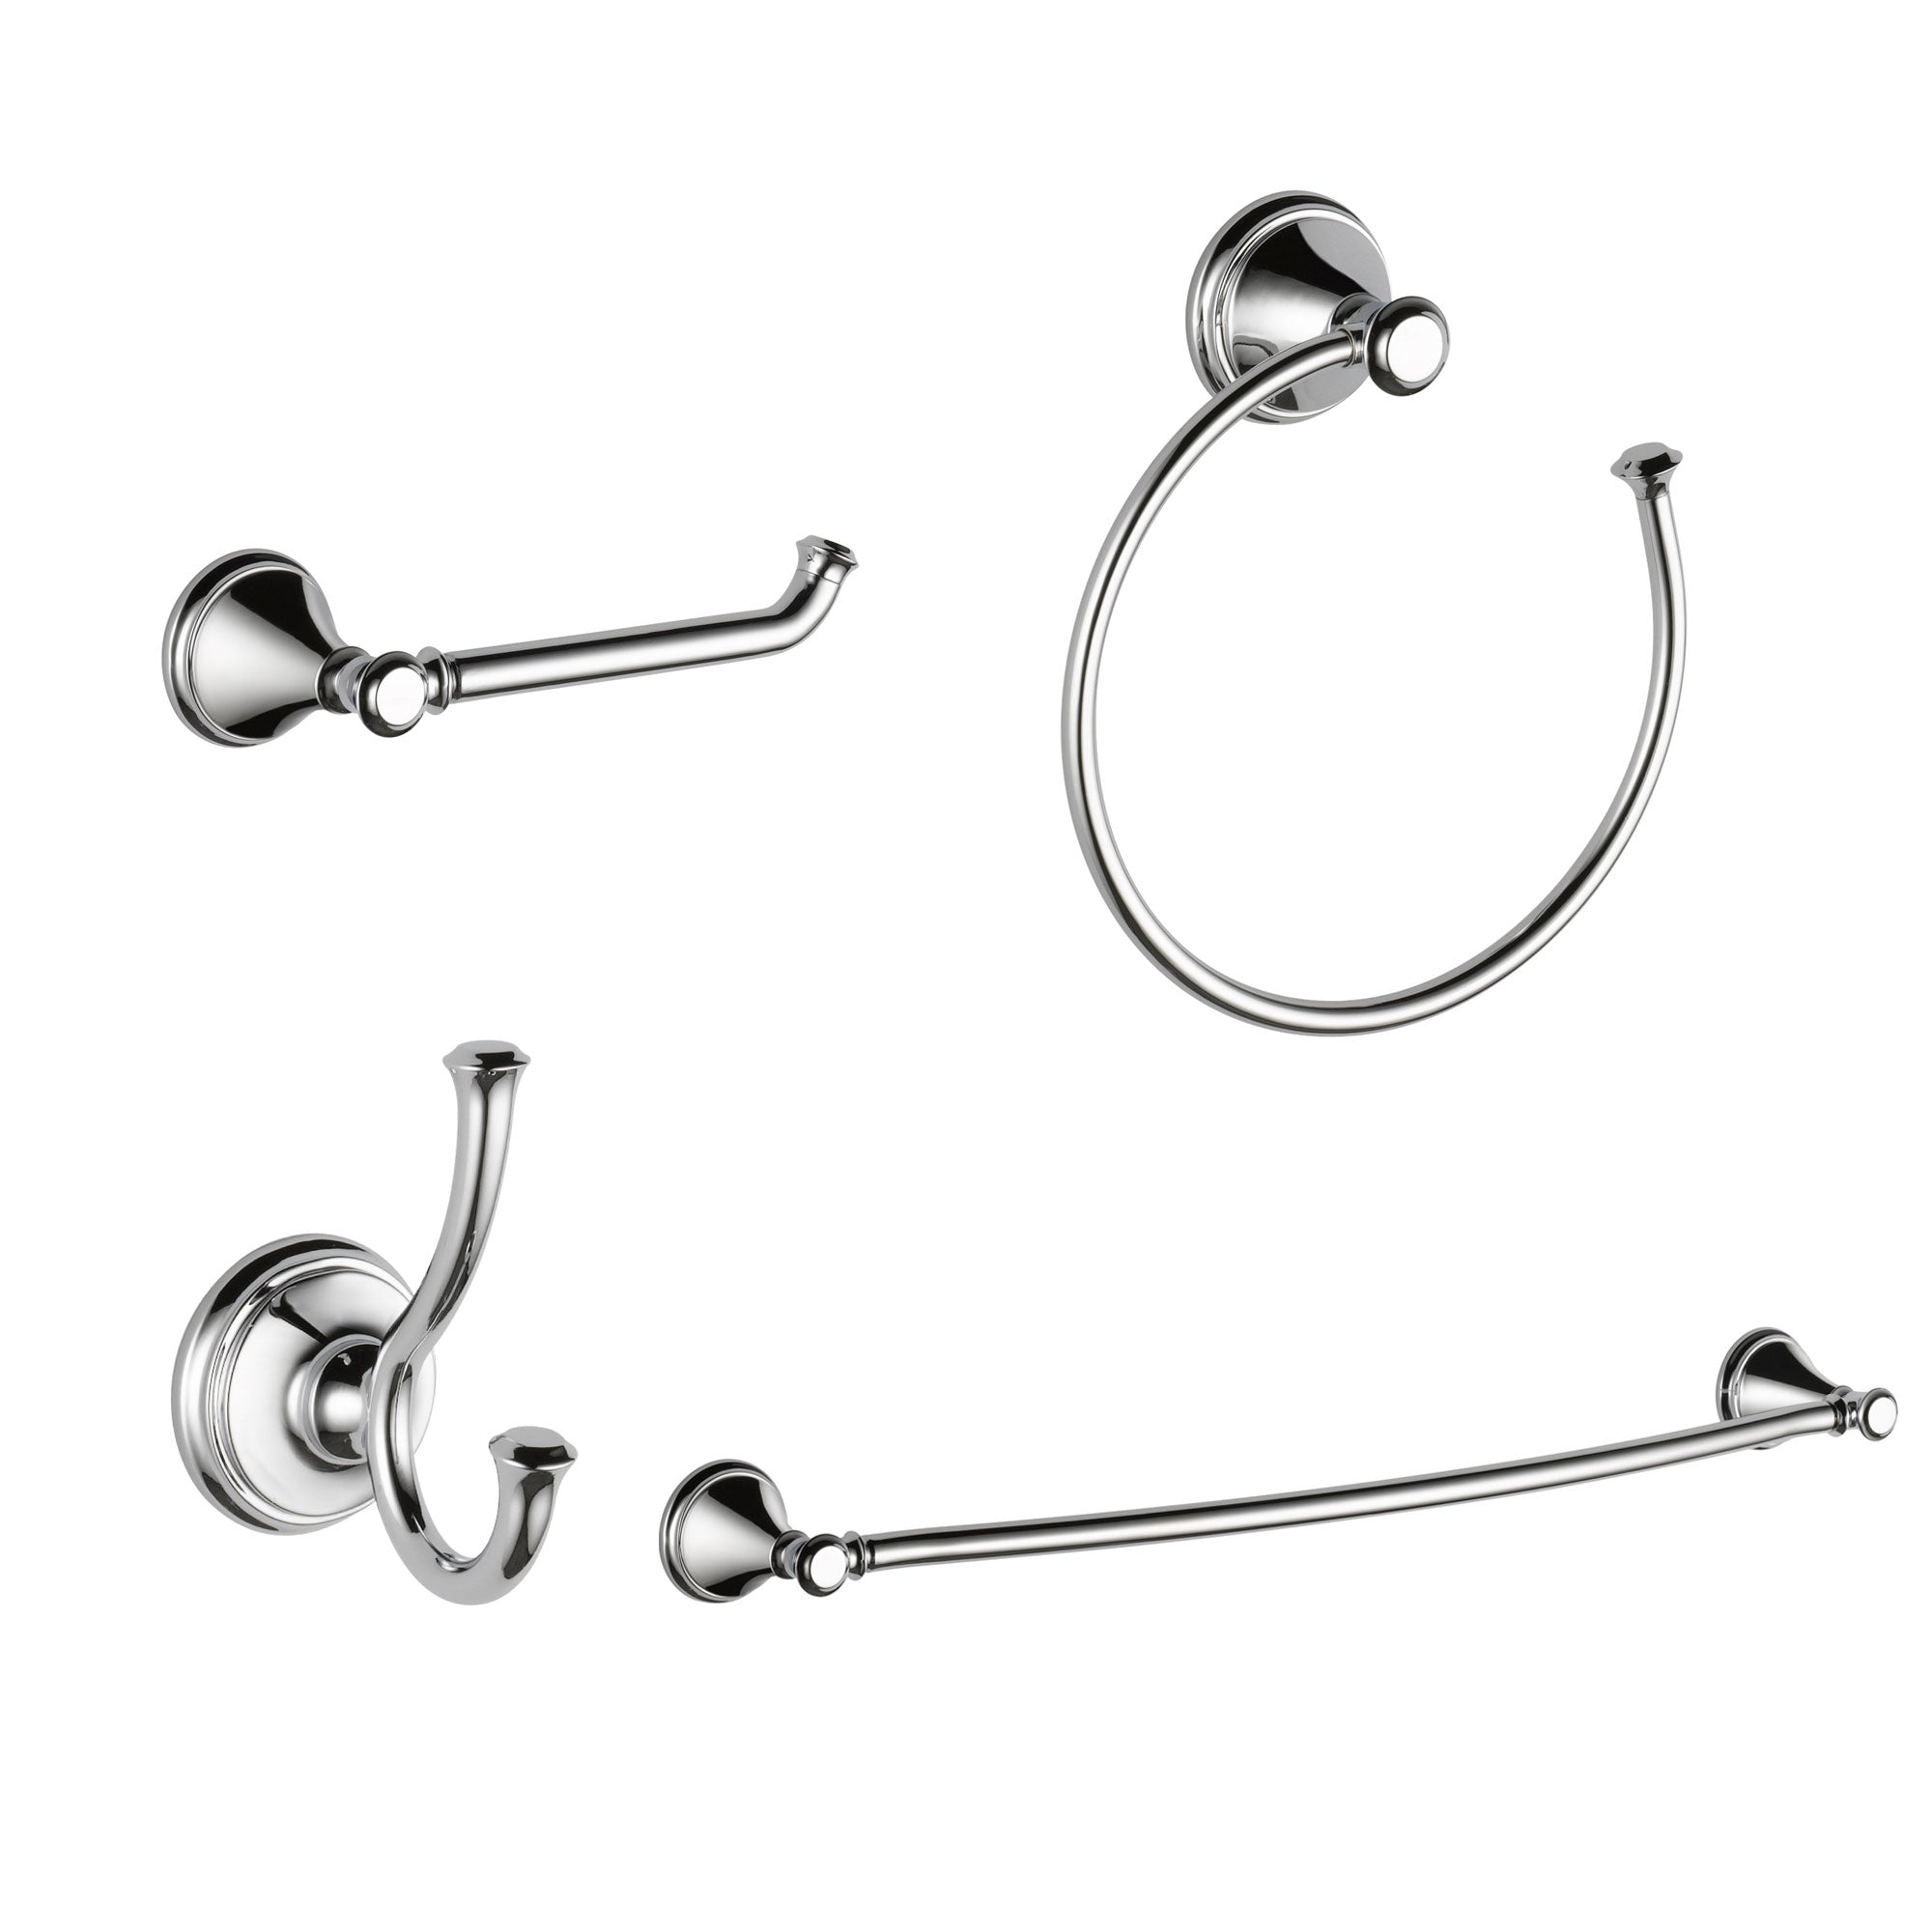 Delta Cassidy Chrome STANDARD Bathroom Accessory Set Includes: 24" Towel Bar, Toilet Paper Holder, Robe Hook, and Towel Ring D10017AP